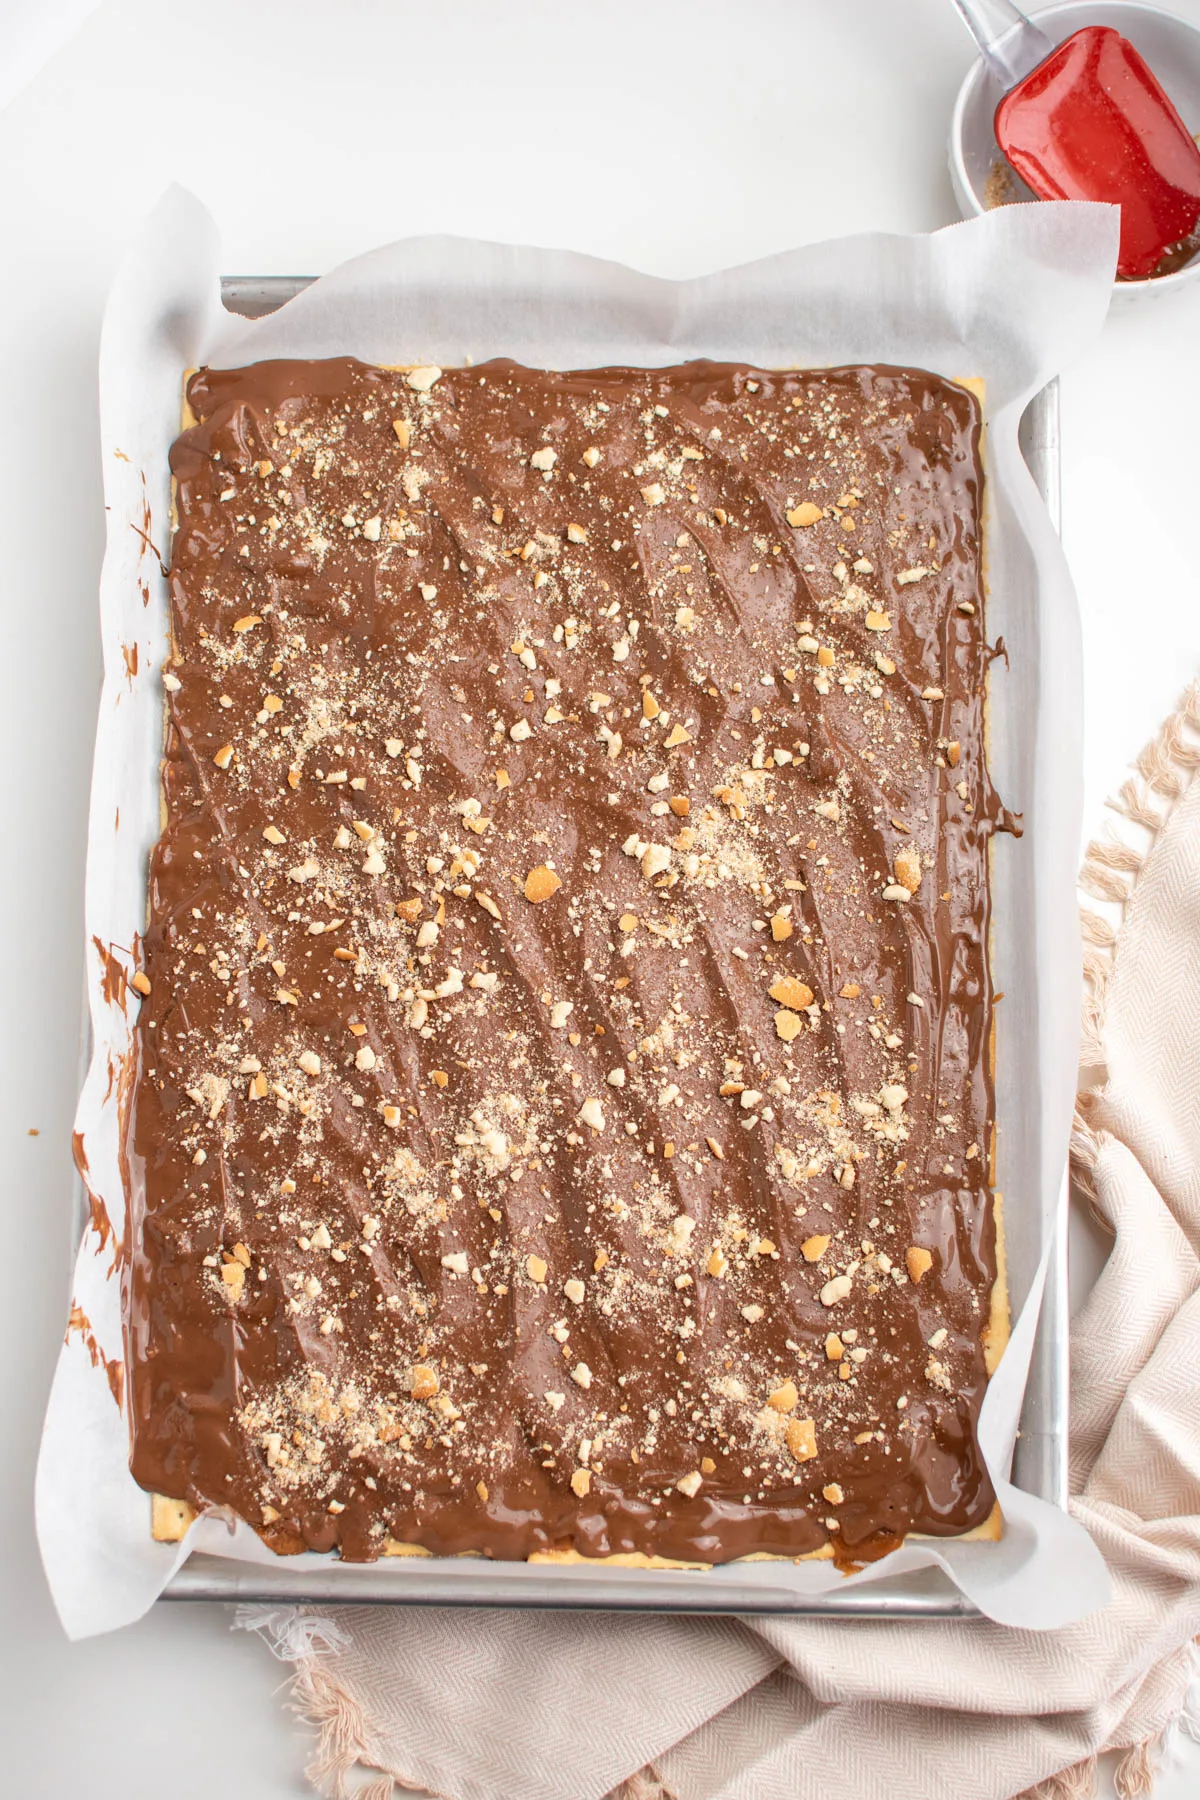 Cracker candy with crumb topping on parchment paper lined baking sheet next to kitchen towel.